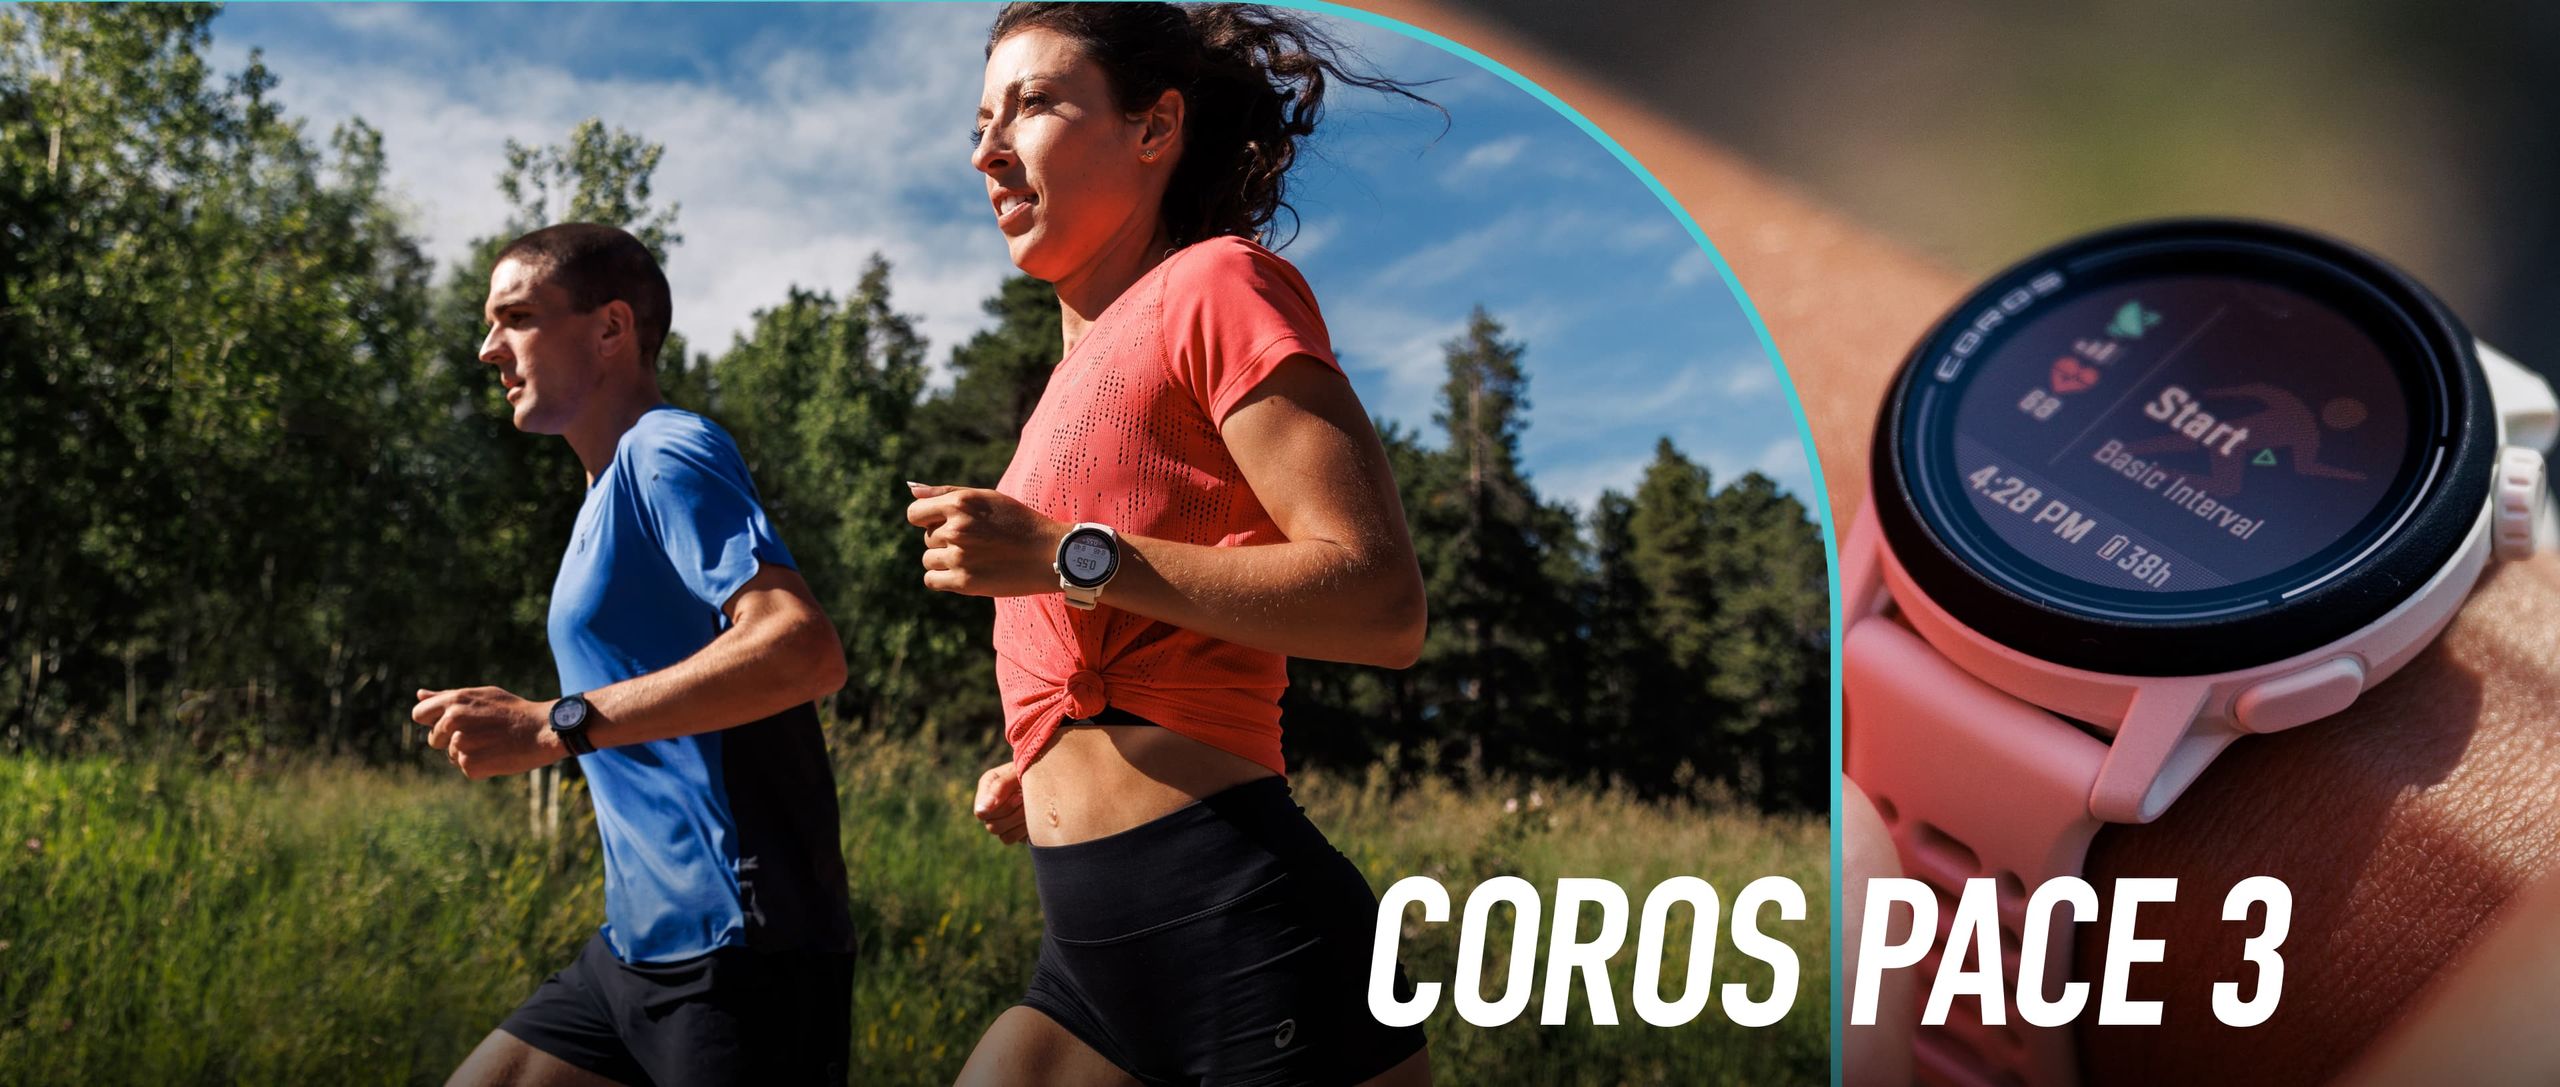 An image of a male and a female runner running outside with COROS PACE 3 watch and a close-up image of a white COROS PACE 3 watch on the activity start page.